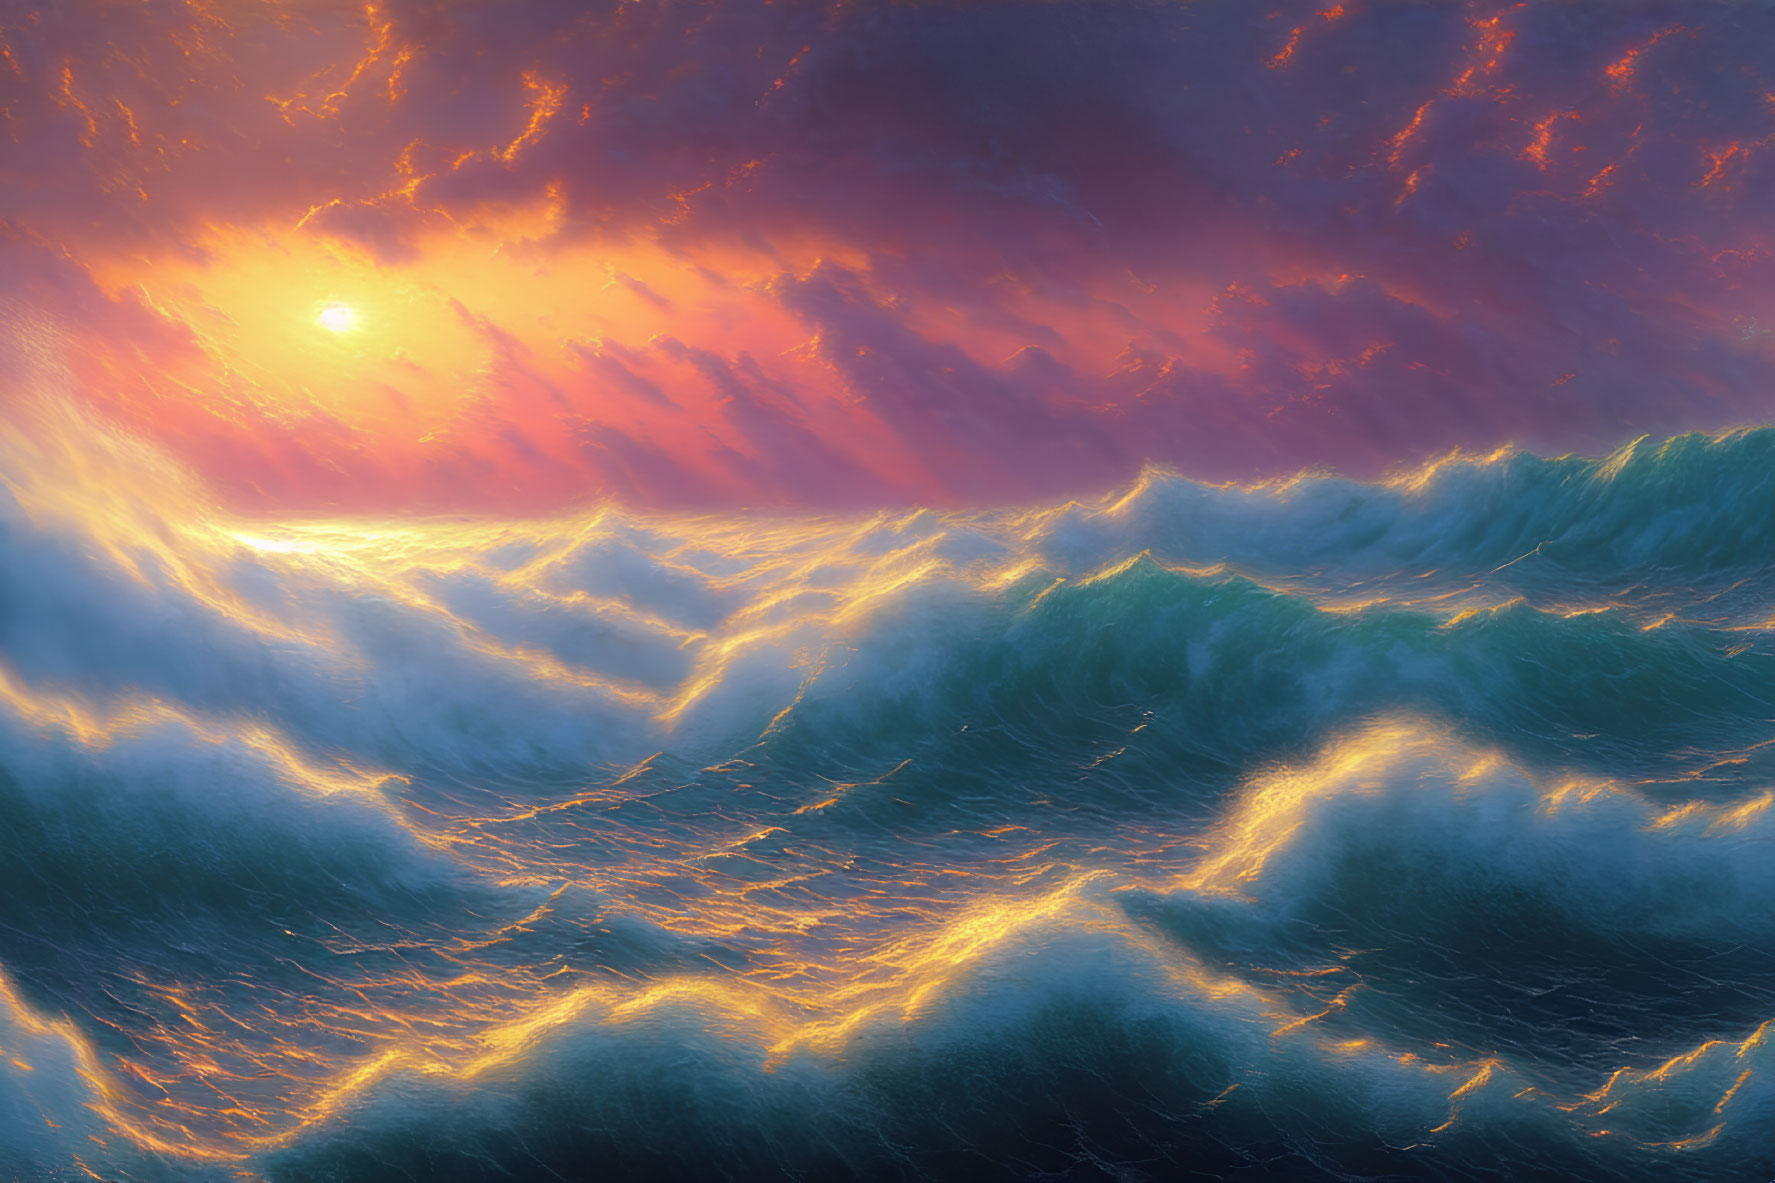 Vibrant sunset scene with orange clouds and towering waves.